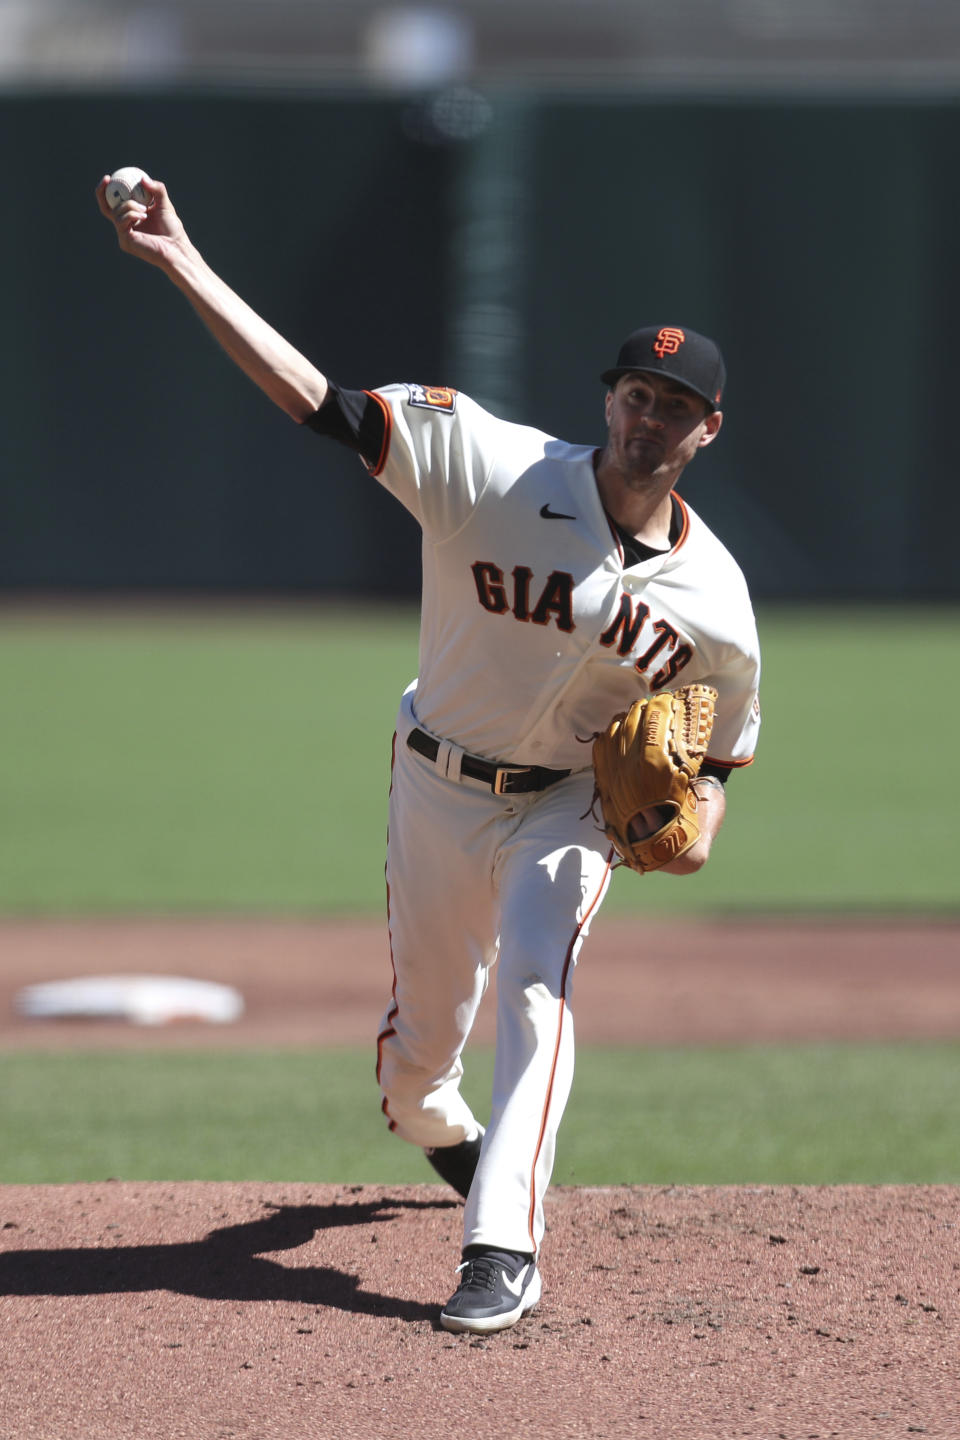 San Francisco Giants' Kevin Gausman throws against the Colorado Rockies during the second inning of a baseball game in San Francisco, Thursday, Sept. 24, 2020. (AP Photo/Jed Jacobsohn)